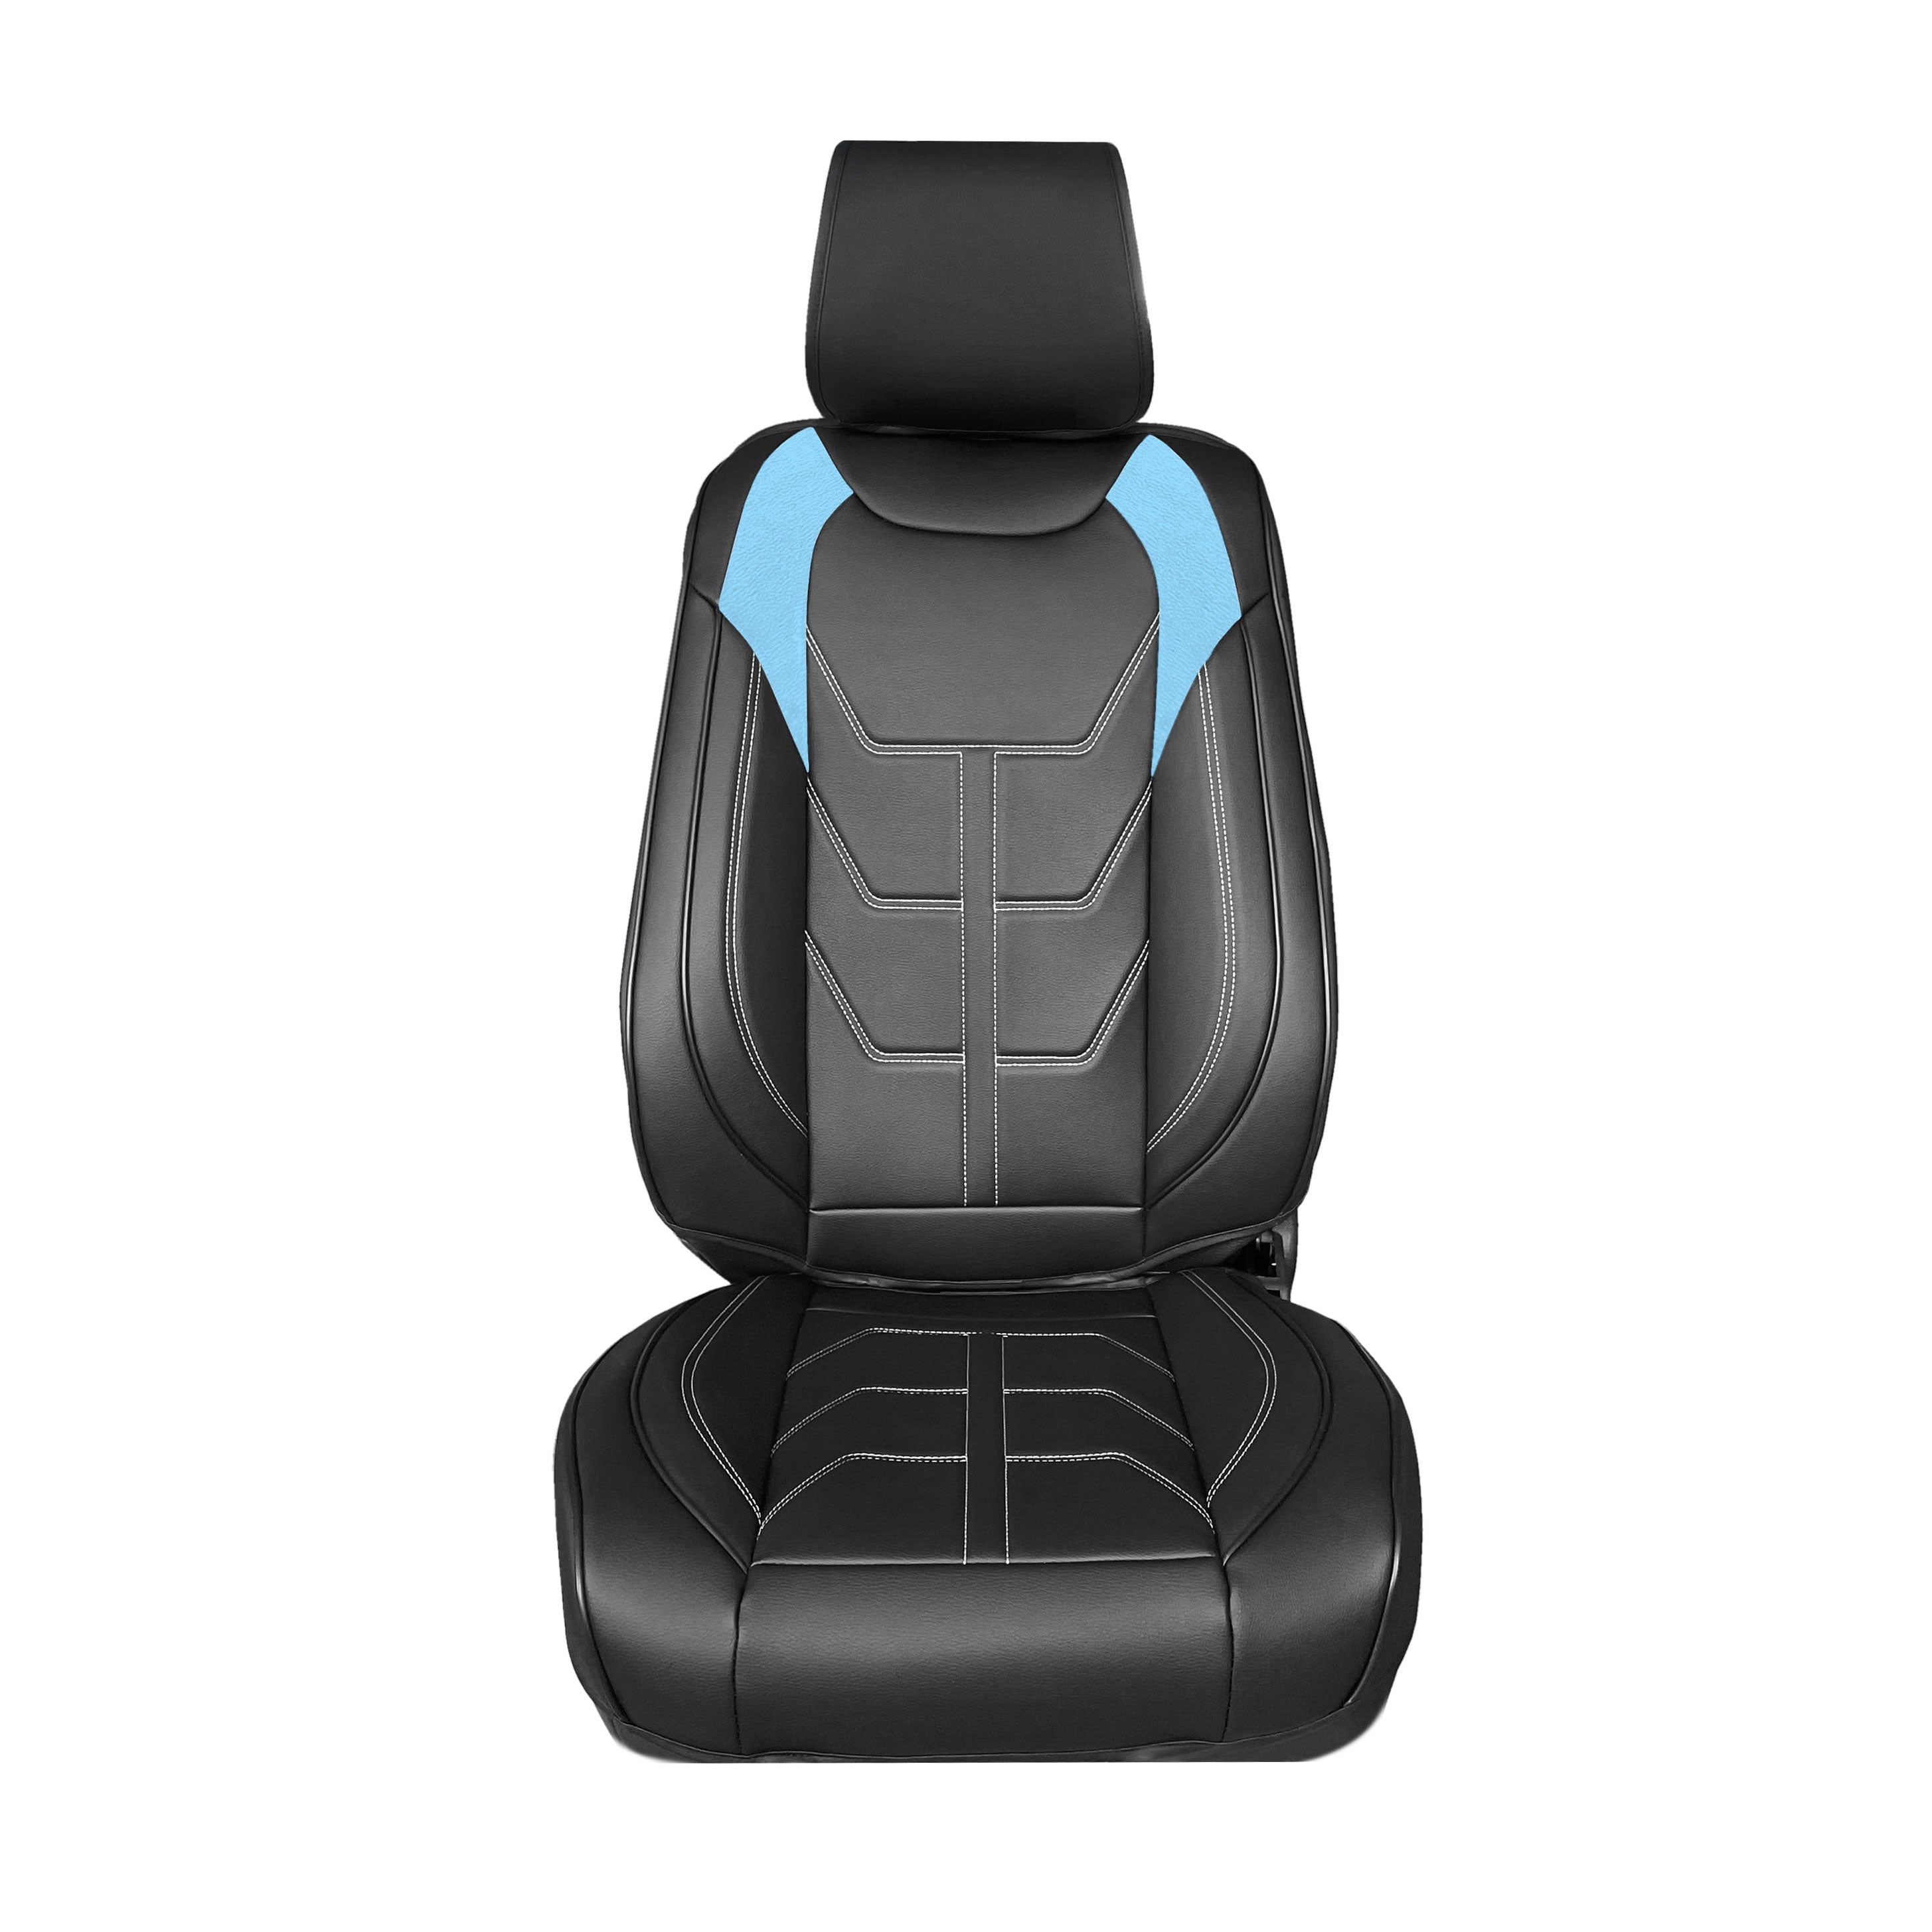 Bionic70 Deluxe Faux Leather Car Seat Covers with Contrast Stitching - Front Set Blue